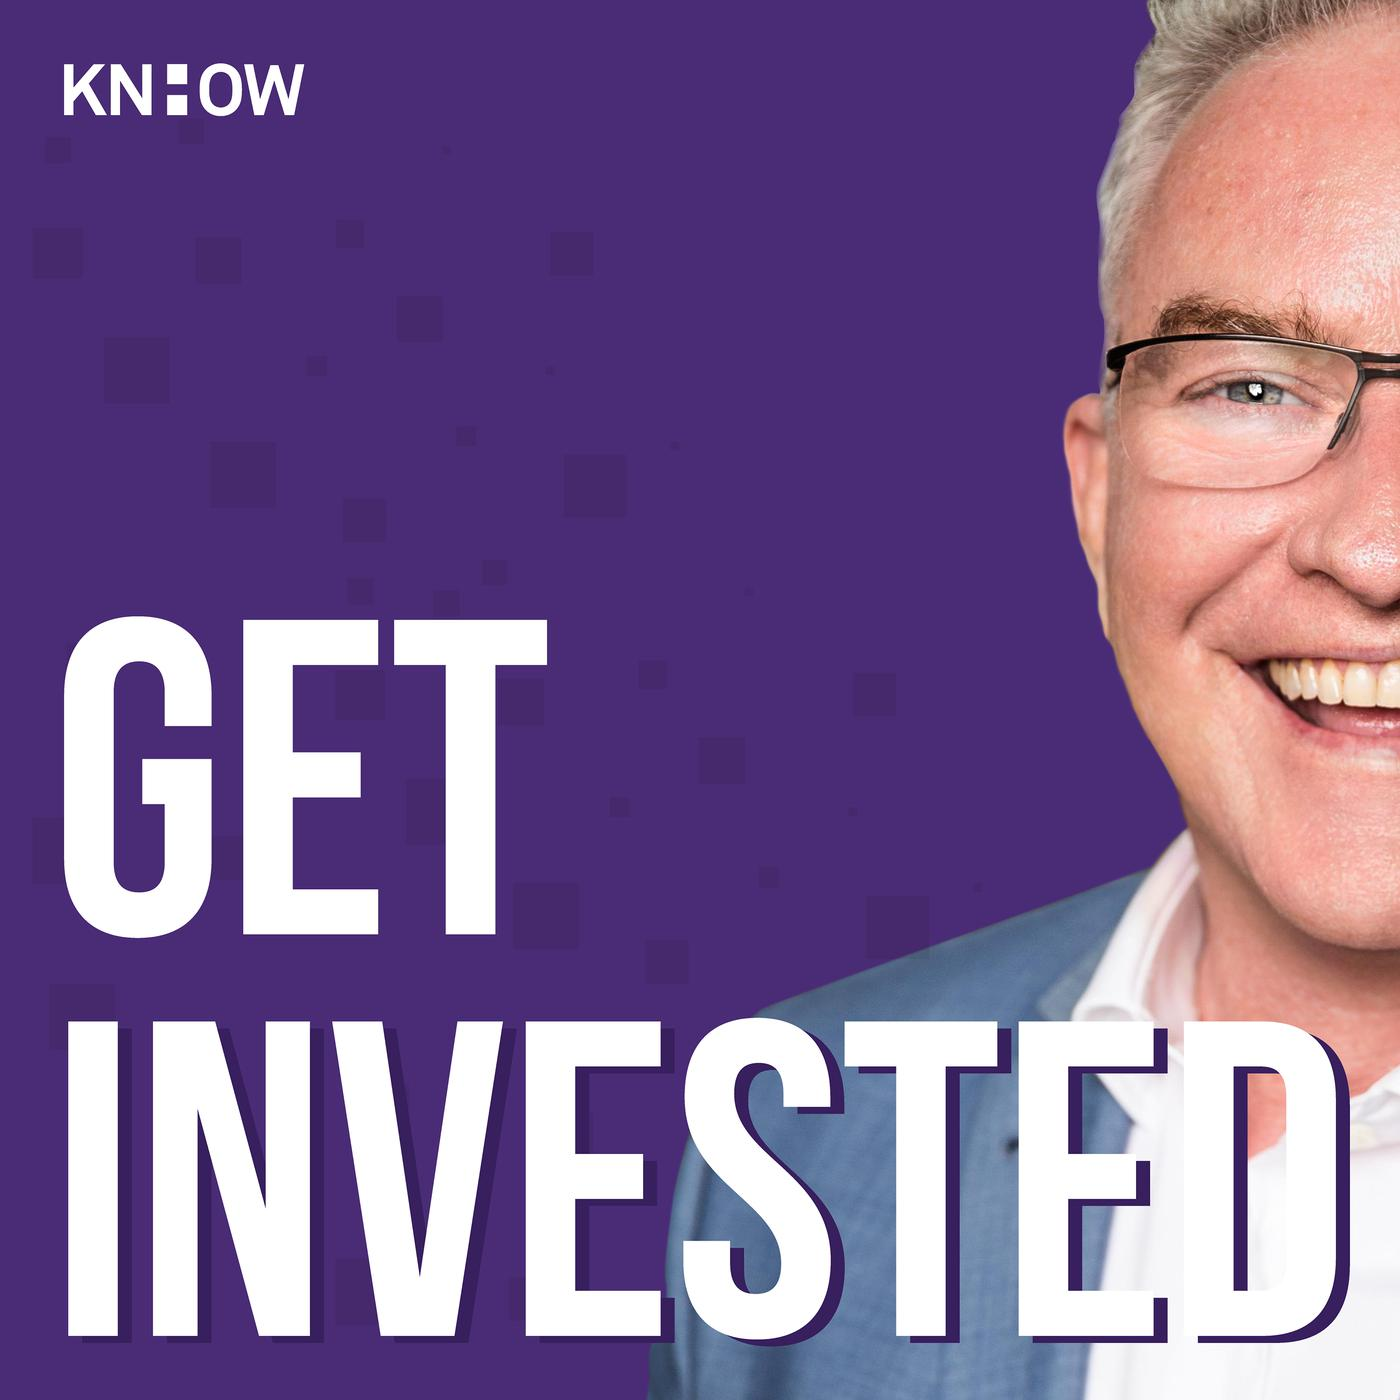 Get Invested: How to be a better investor with Ramin Nakisa